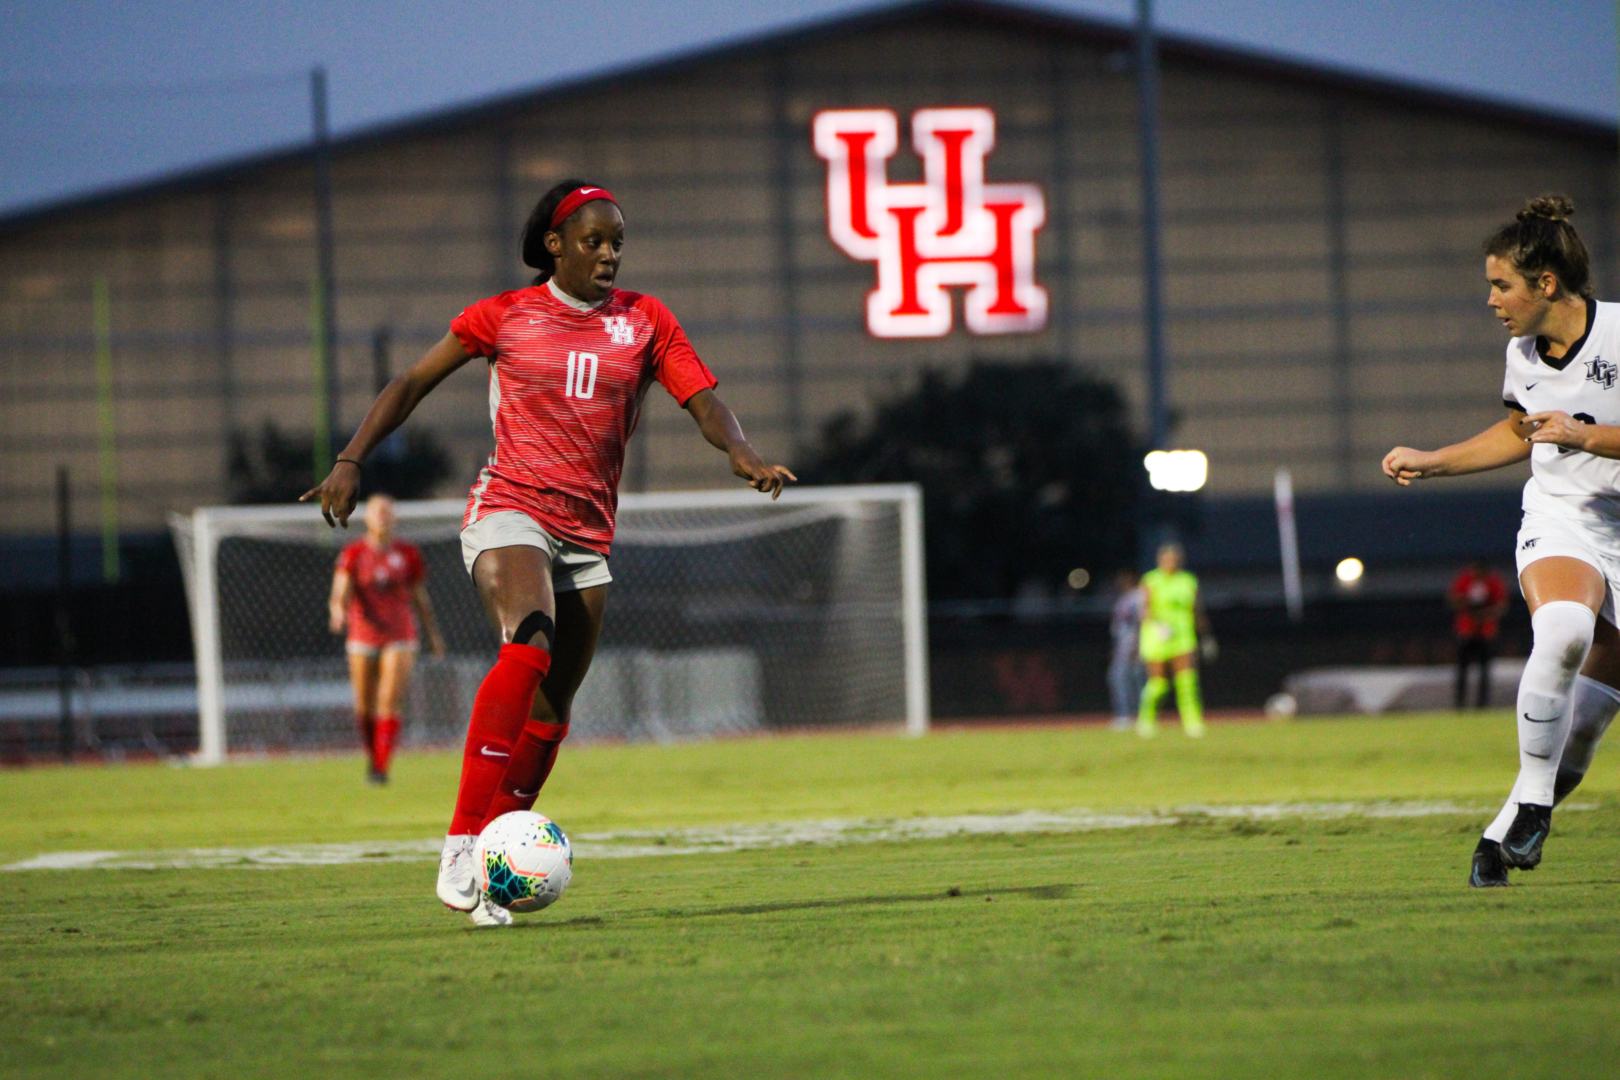 Senior forward Jazmin Grant's goal powered UH soccer over No. 14 UCF Thursday night in the Cougars 2021 AAC opener. | Sean Thomas/The Cougar